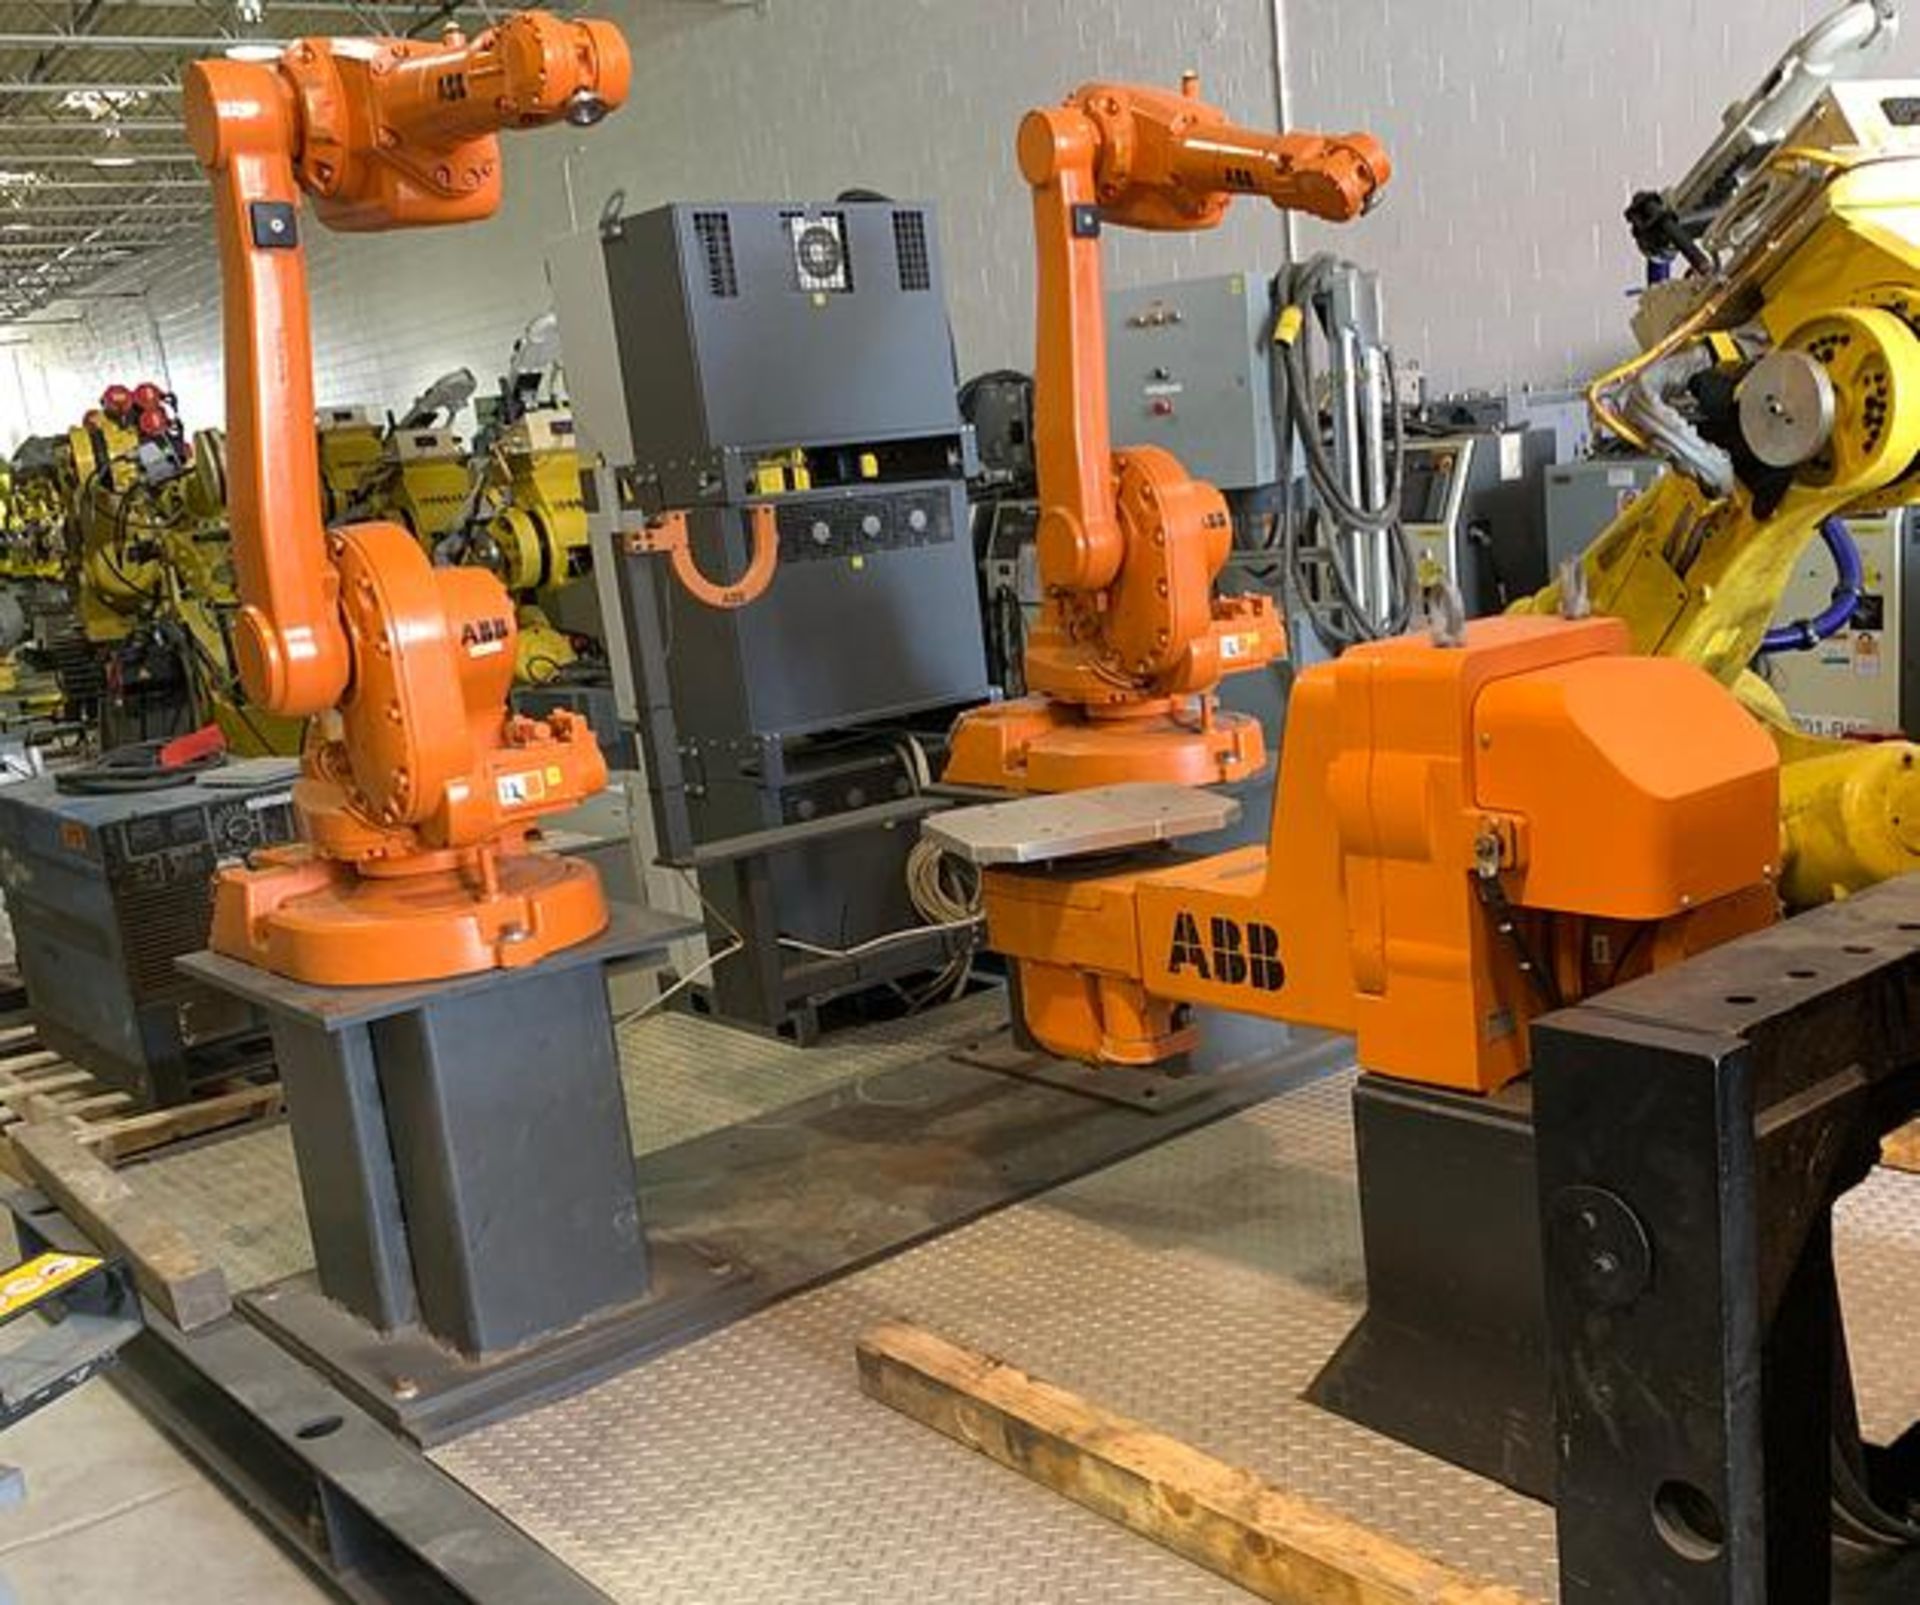 ABB ROBOTS IRB 1600-5/1.45 DUAL ARM ROBOTIC CELL WITH ABB TYPE MTC 750 POSITIONER AND IRC5 CONTROLS